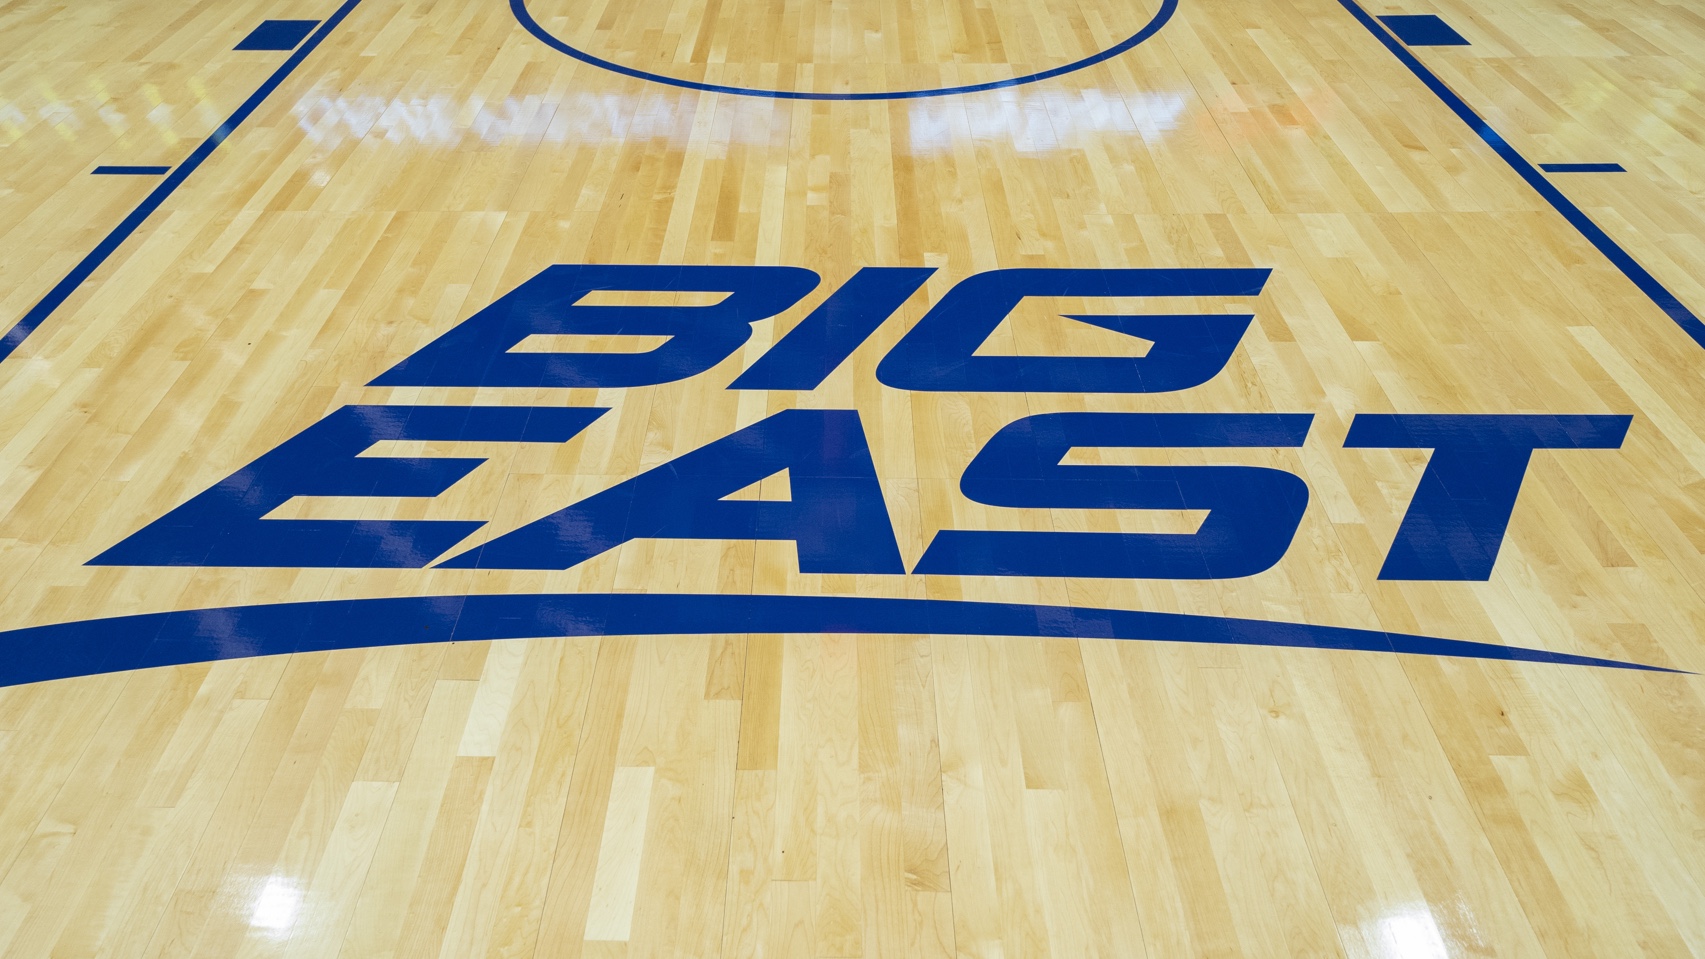 Big East Tournament 2021 live stream, bracket and schedule and how to